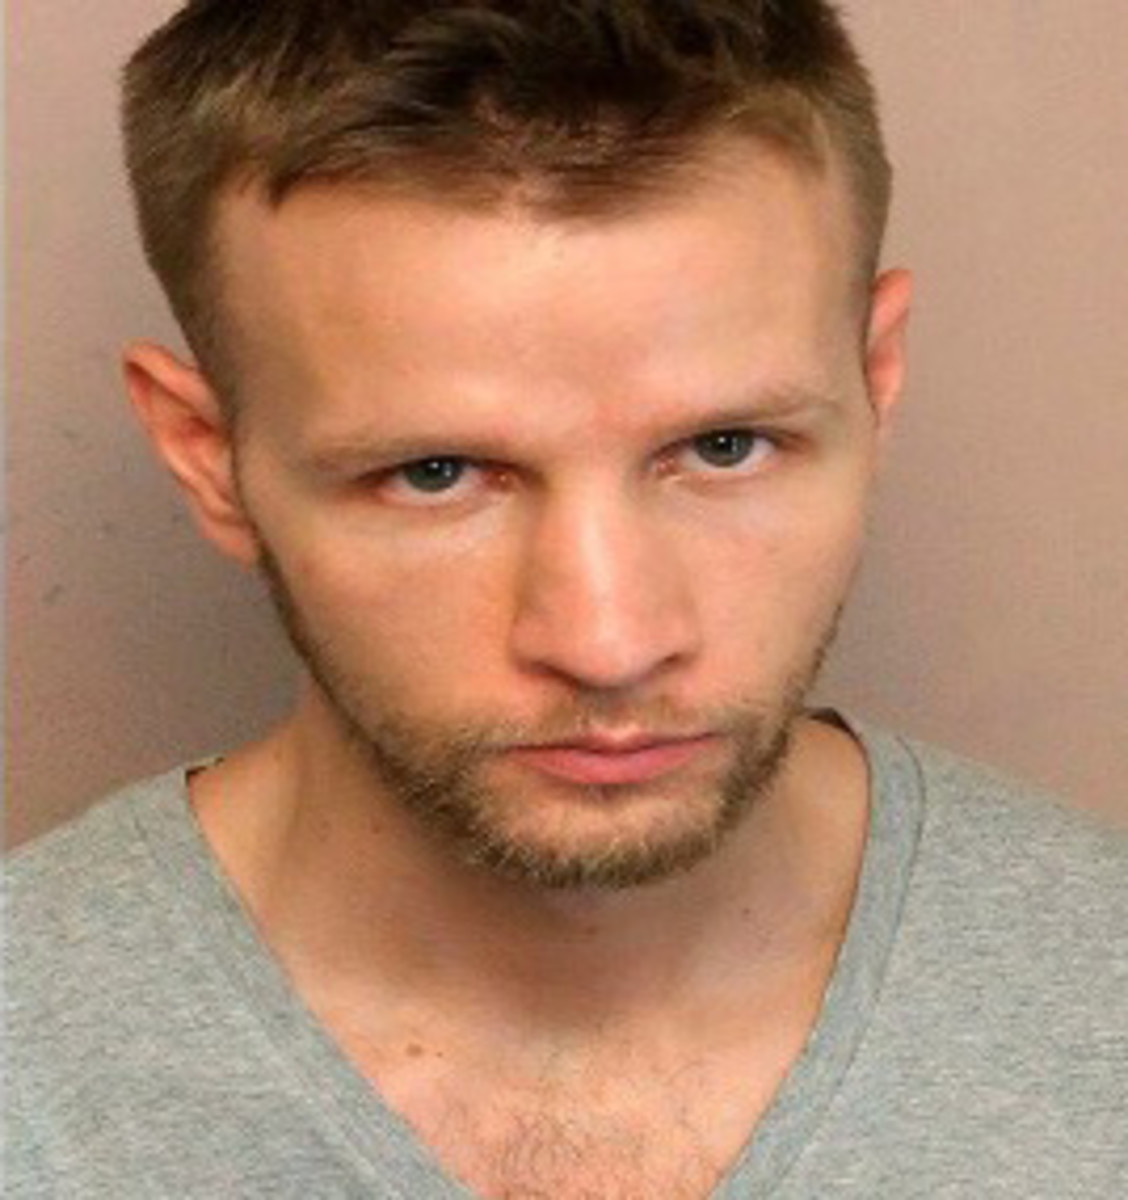 Daniel Hale in a police photo taken at the time of his arrest in 2019. [Source: knowdrones.com]